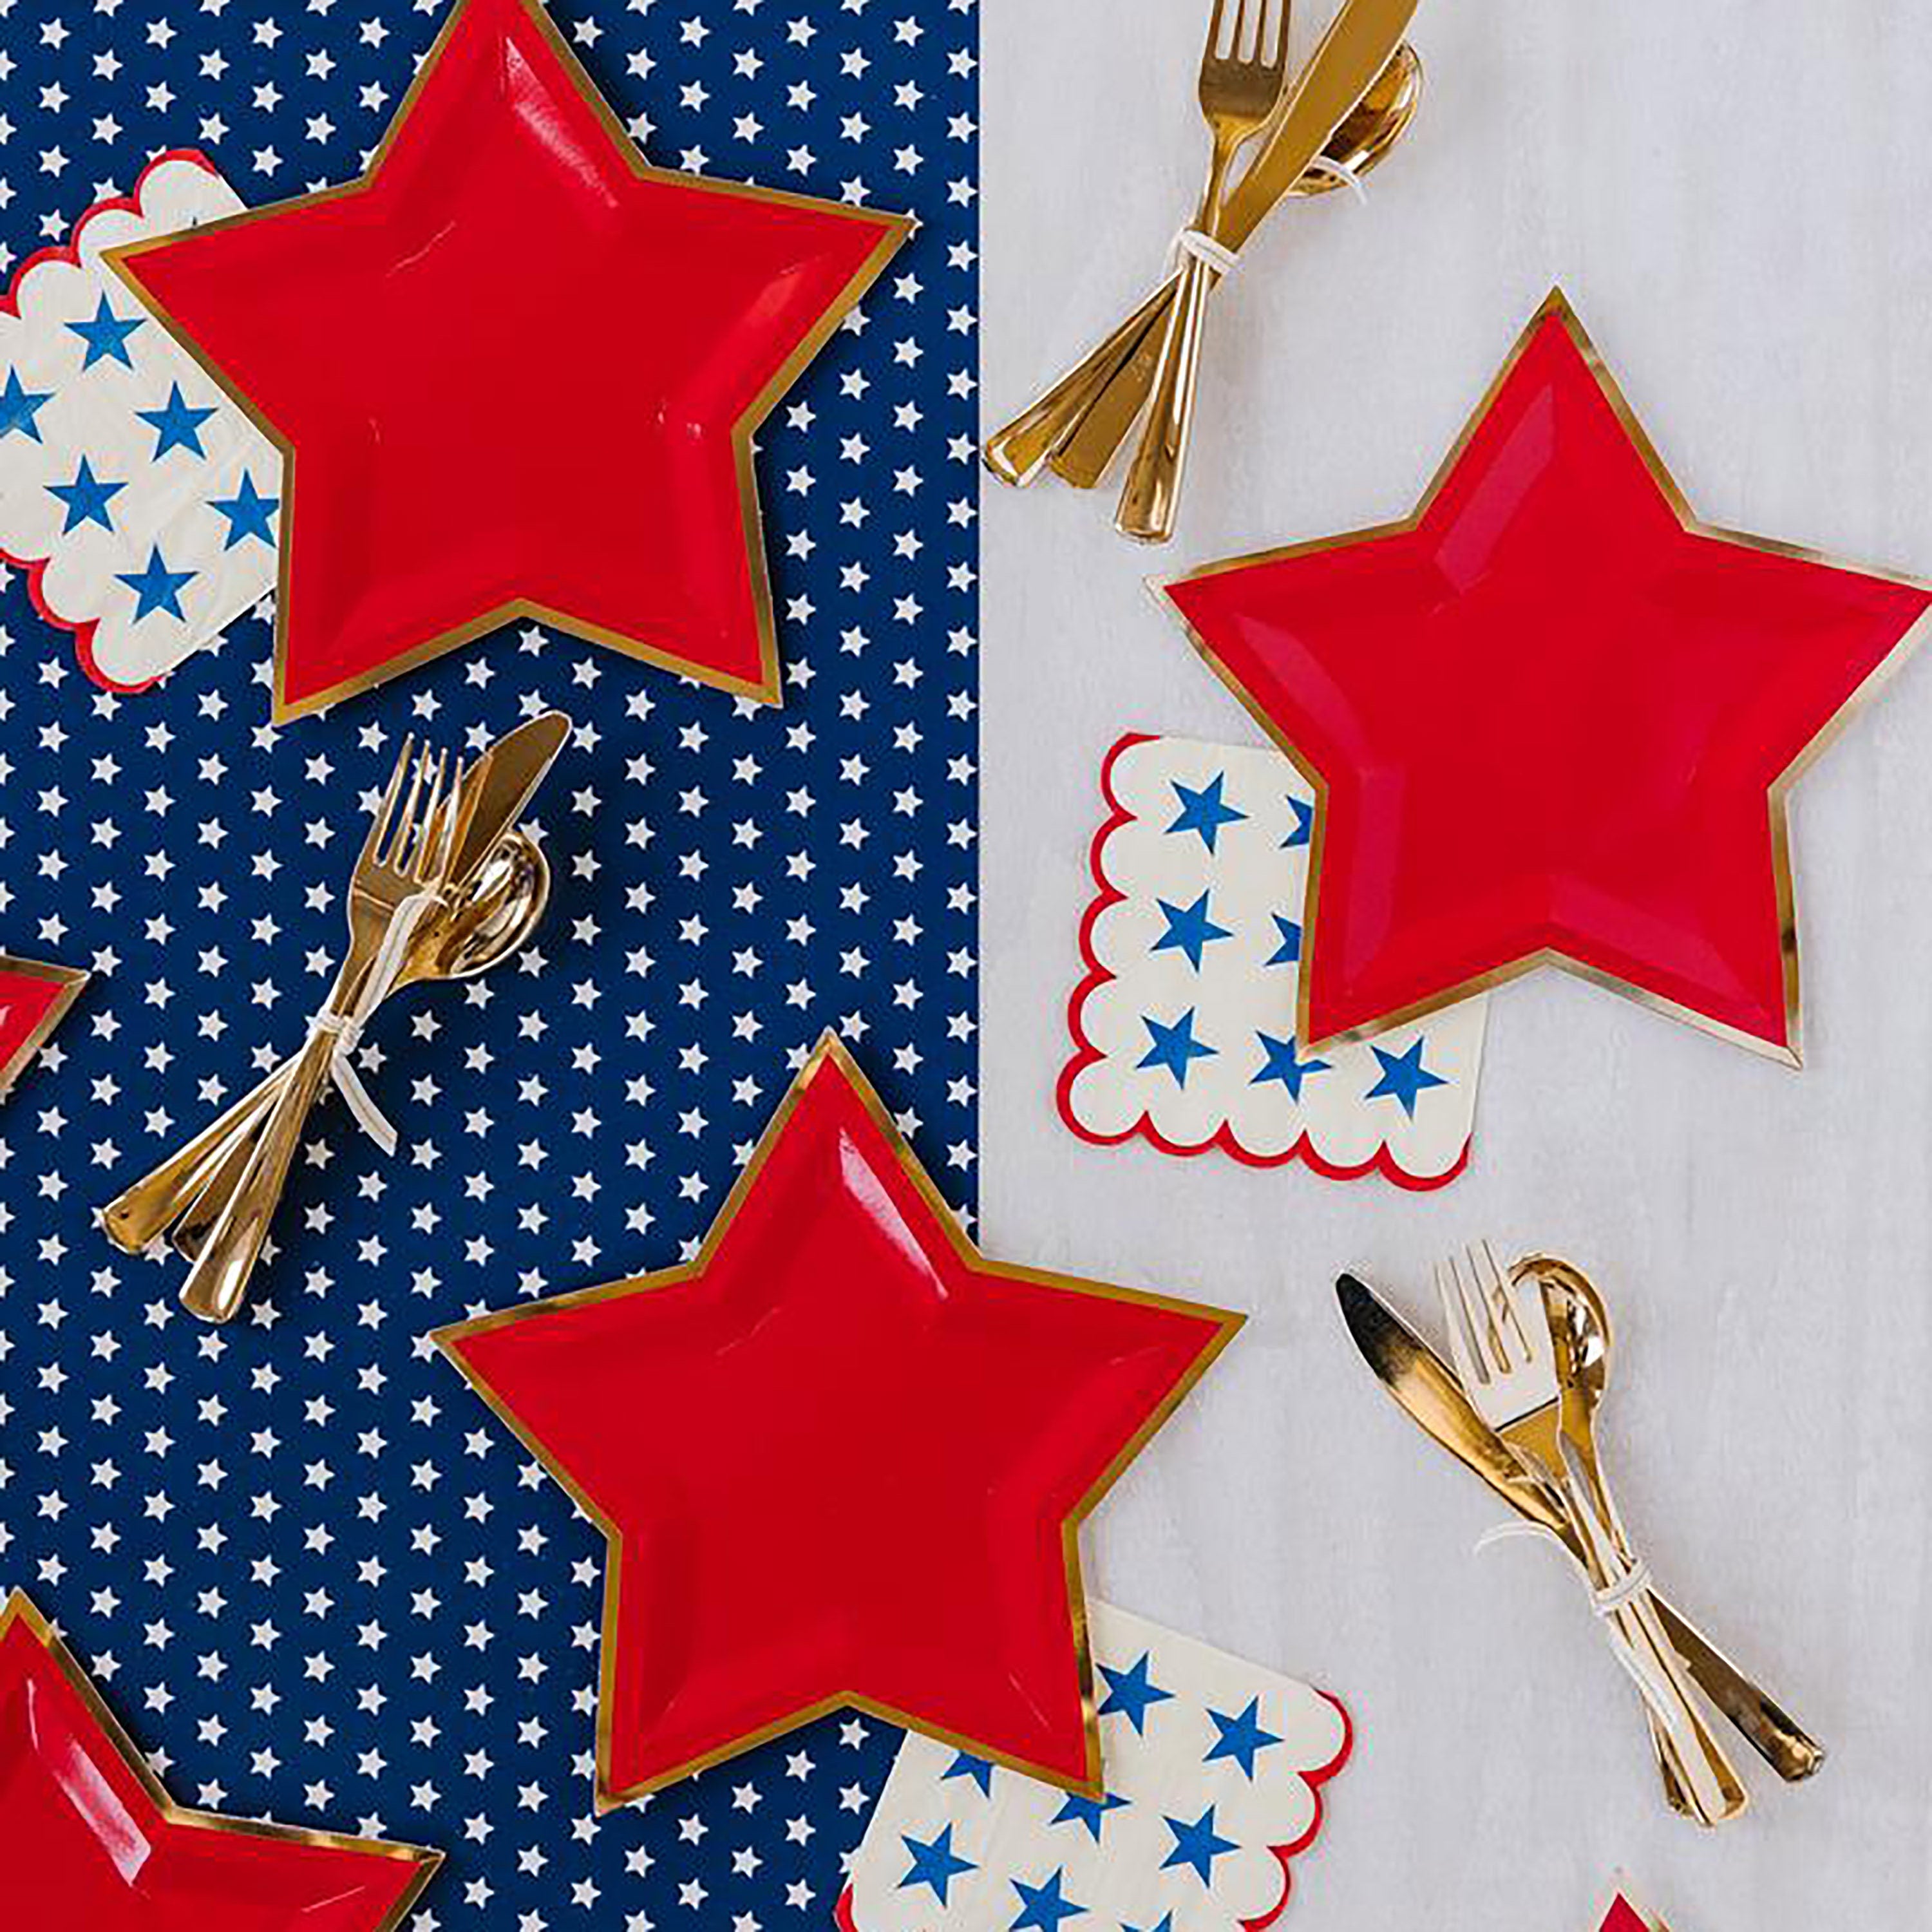 Patriotic Napkins | 4th of July Napkins - 4th of July Table Decorations - 4th of July Party - Patriotic Party - 4th of July Party Decoration